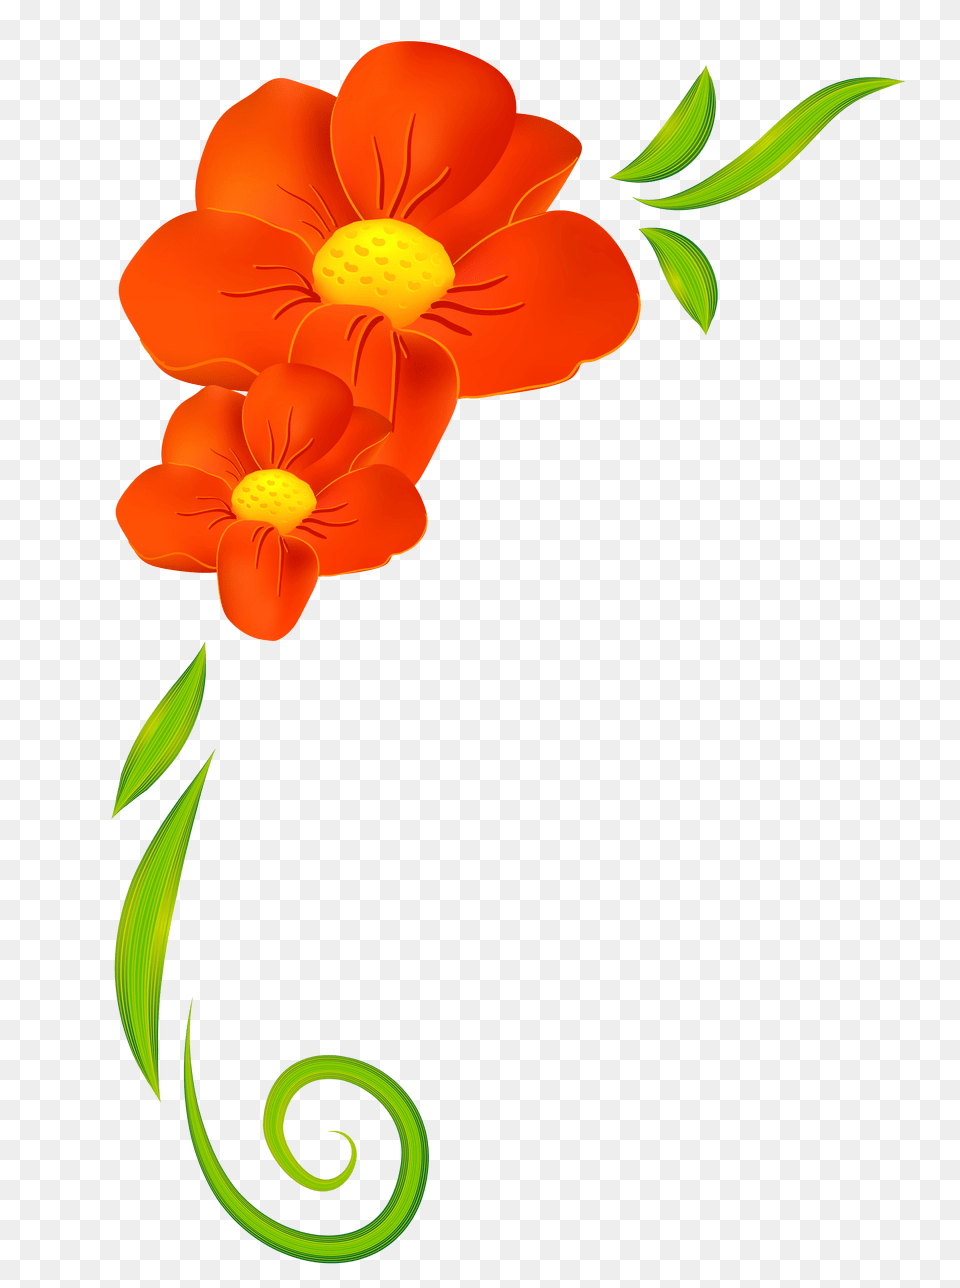 Flowers Color Clipart Pretty Flower Clipart On With Clip, Art, Floral Design, Graphics, Pattern Png Image